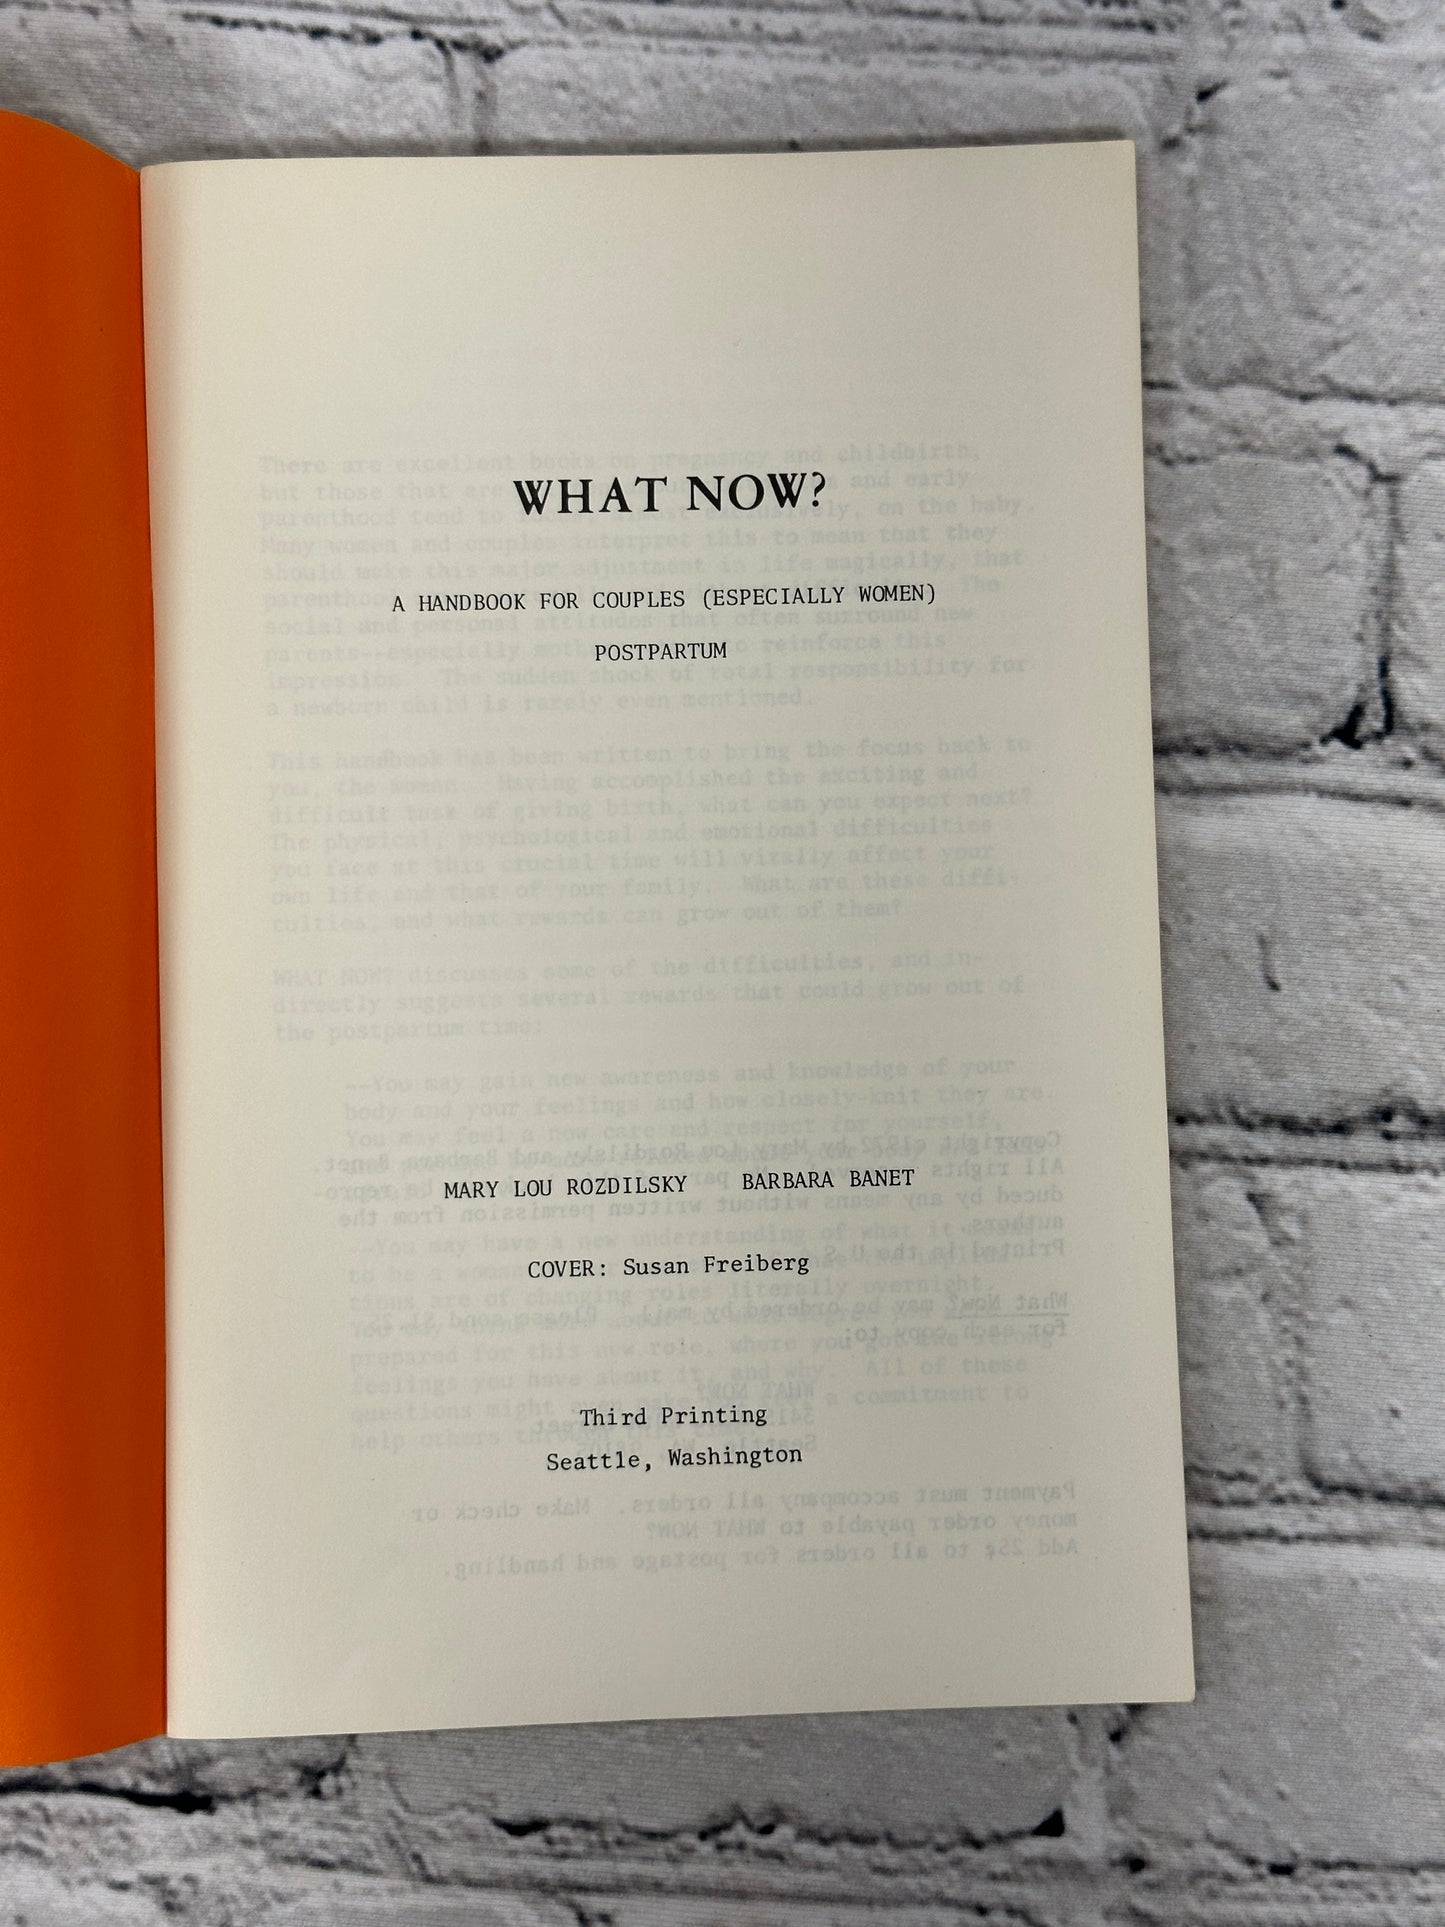 What Now? A Handbook for Parents By Rozdilsky & Banet [1972 · Third Printing]